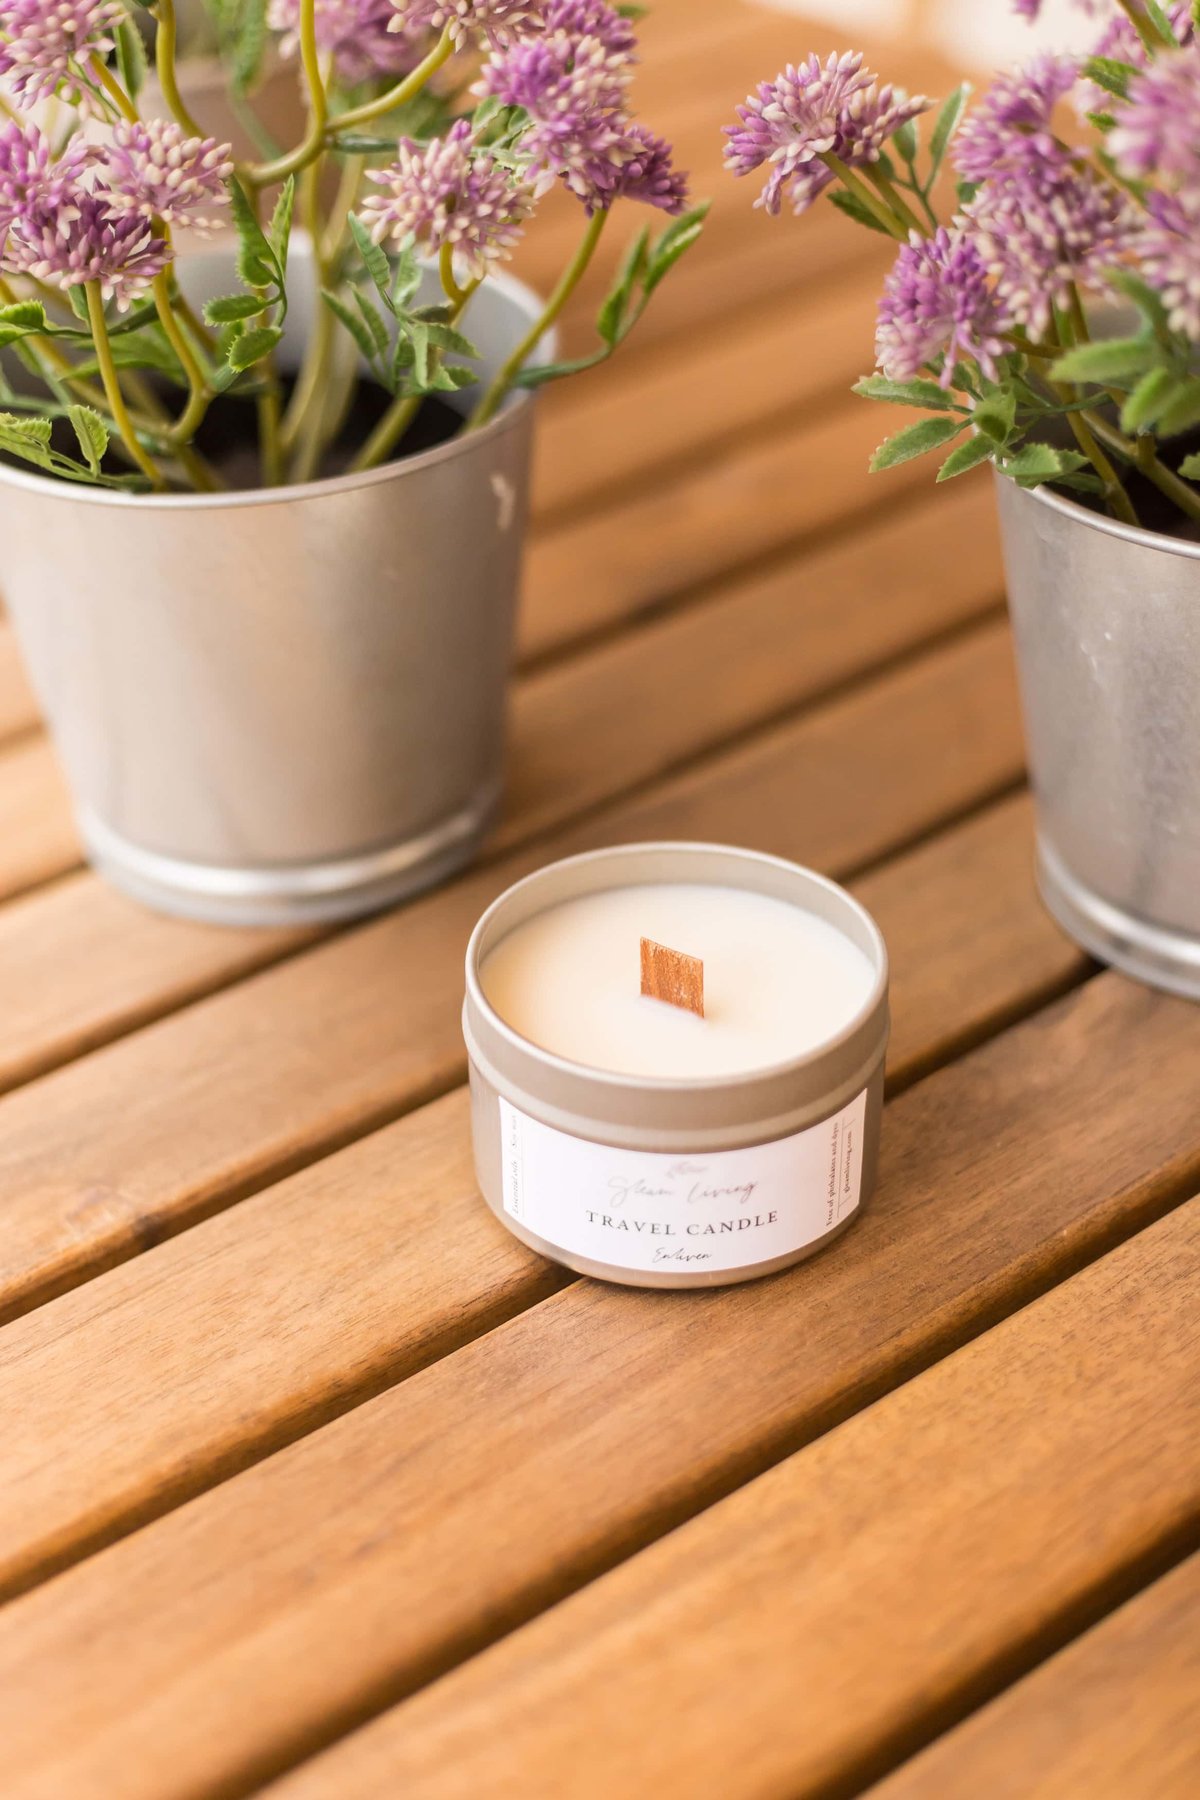 Atelier21 Co - Travel Candle-003